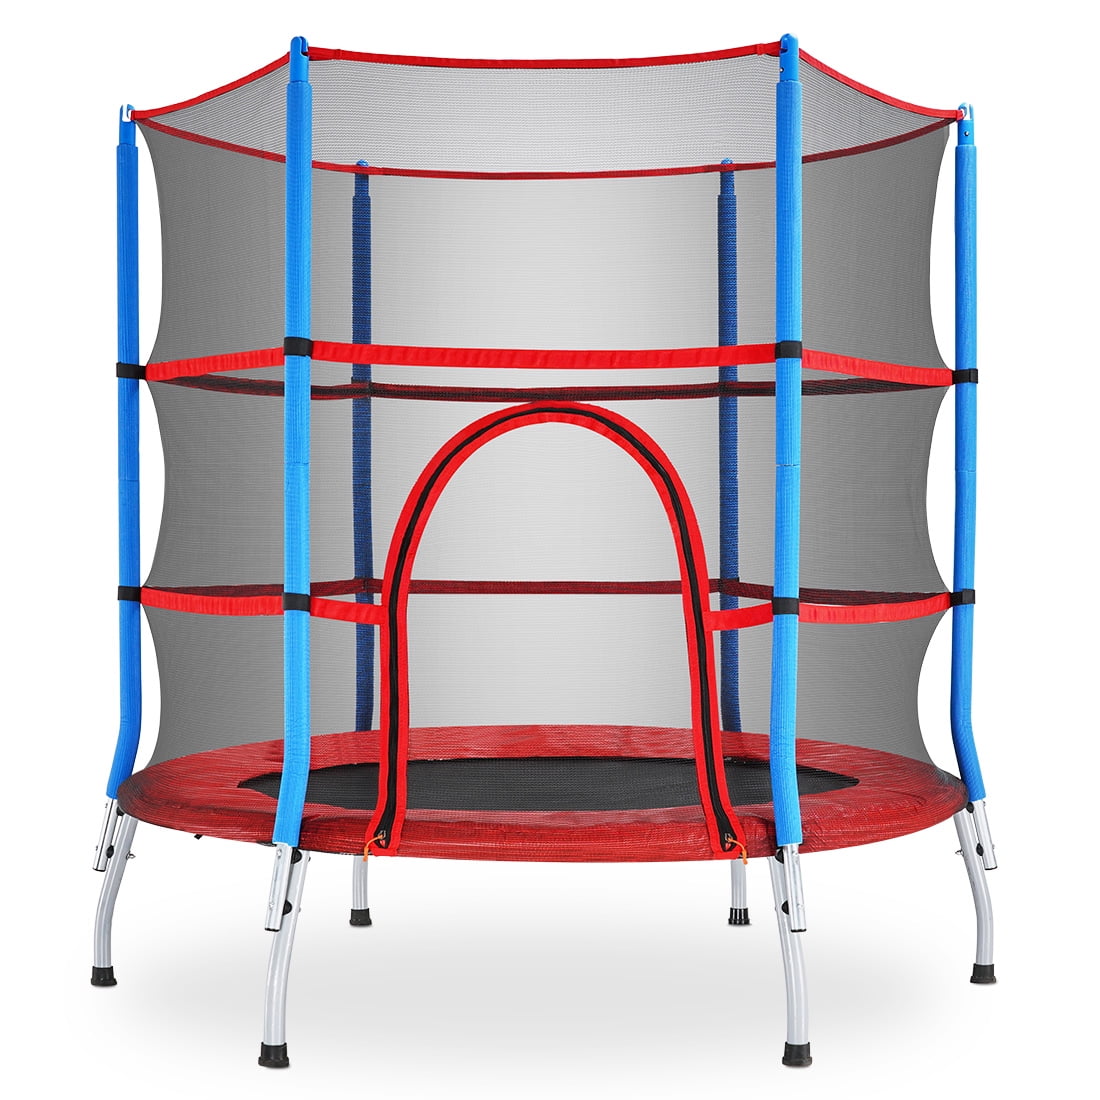 60" Kids Trampoline with Safety Enclosure Net Spring Pad Heavy Duty Steel Frame 